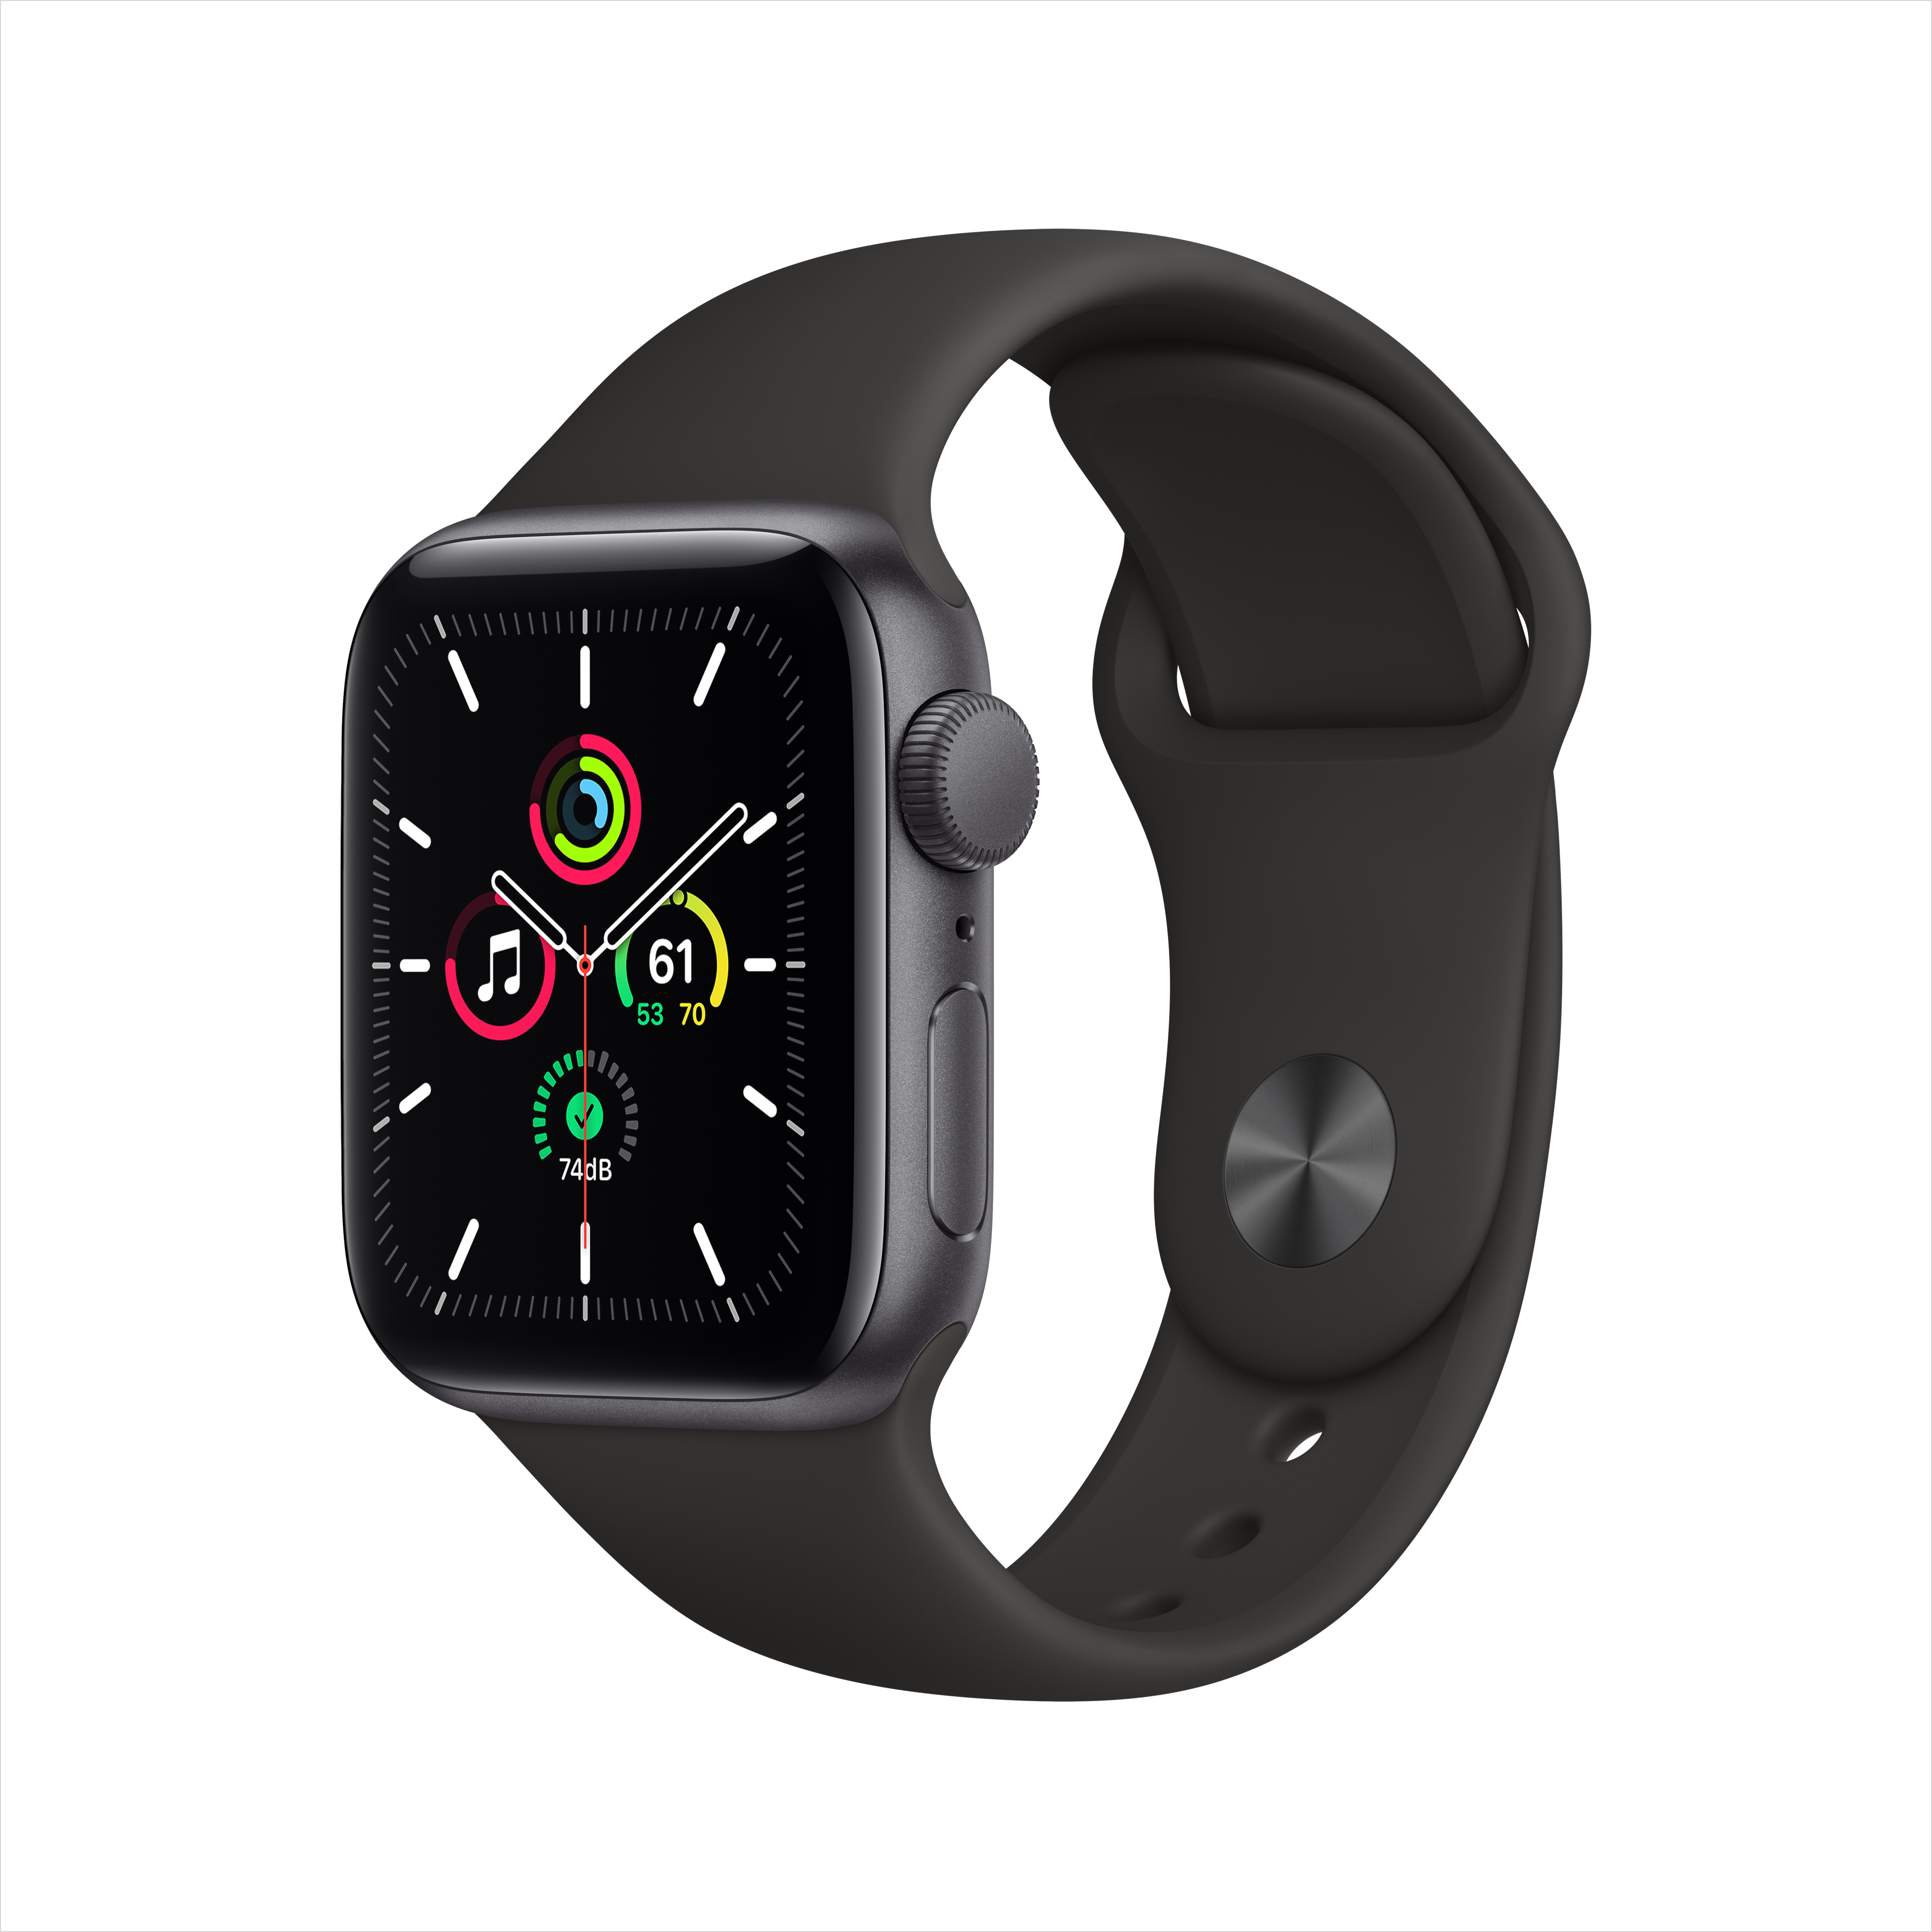 Apple Watch SE (1st Gen) GPS, 40mm Space Gray Aluminum Case with Black Sport Band - Regular - image 1 of 9